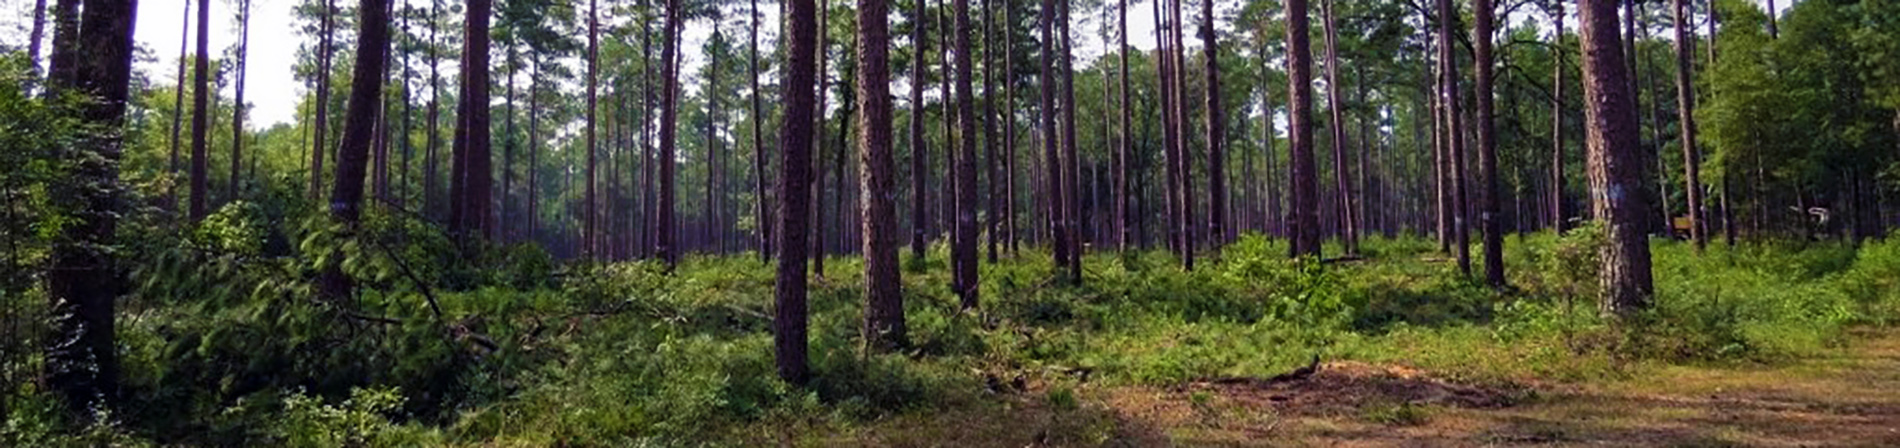 Thinned Pine Forest